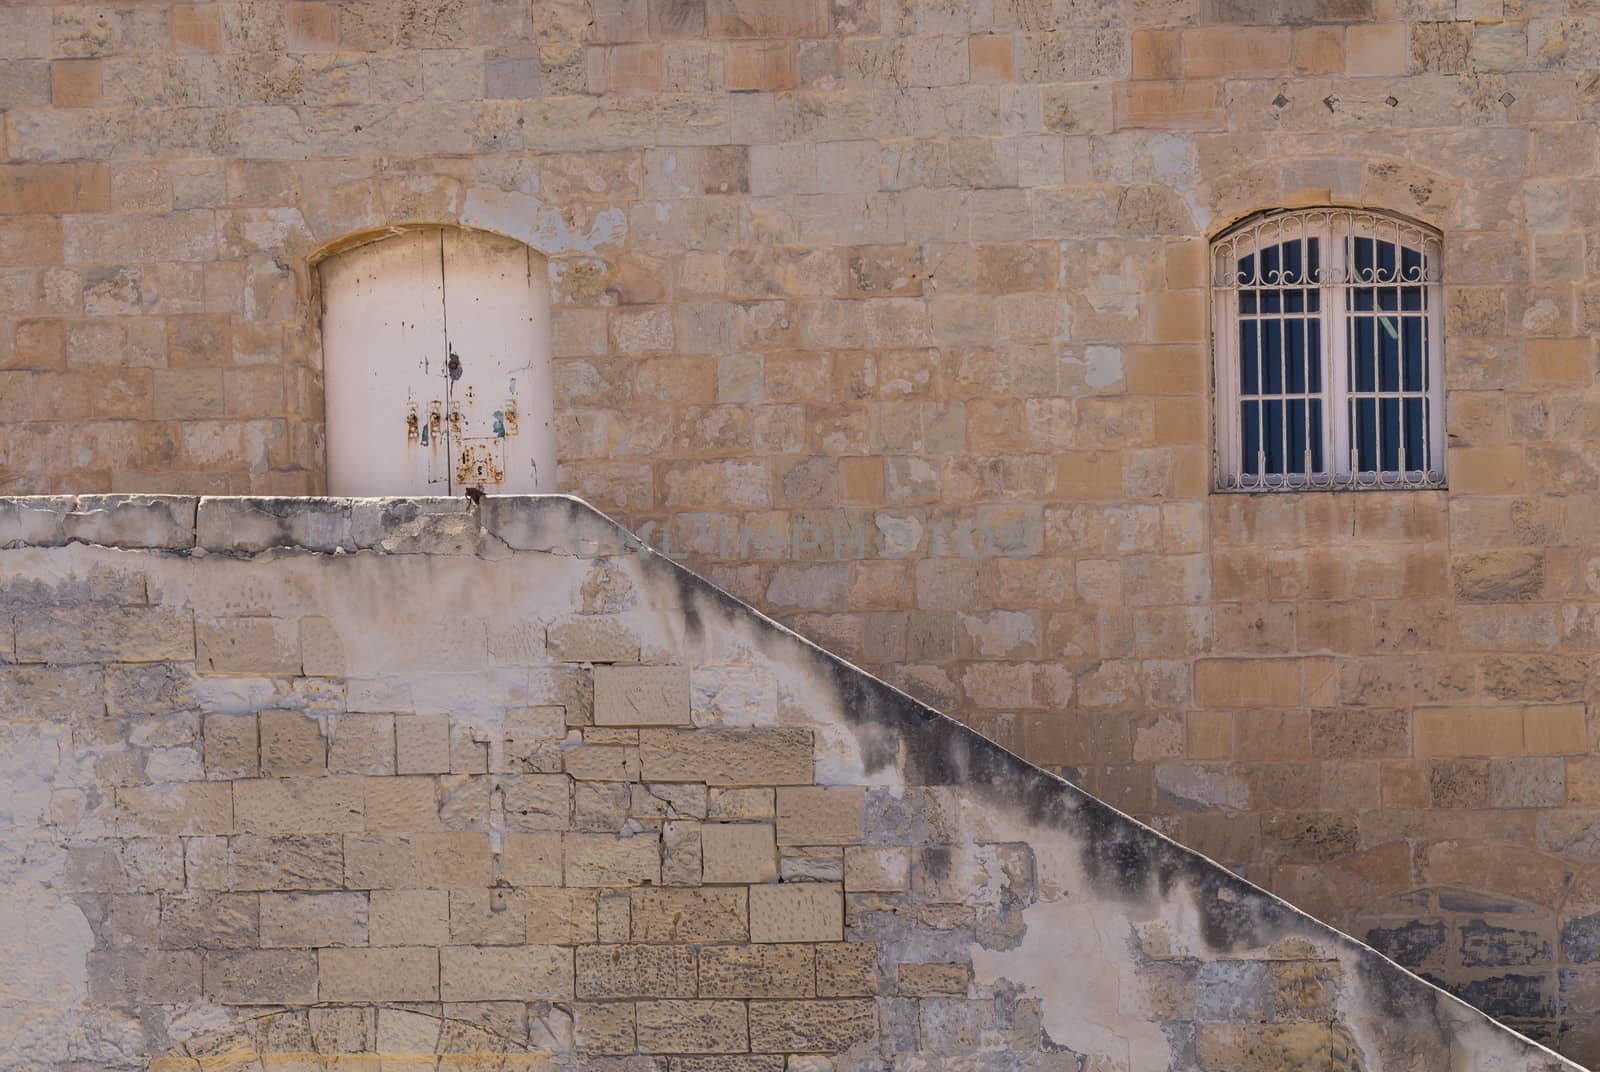 Old building made of stone bricks with a window and a gate. Line of the staircase. Capital of island Malta, Valletta.